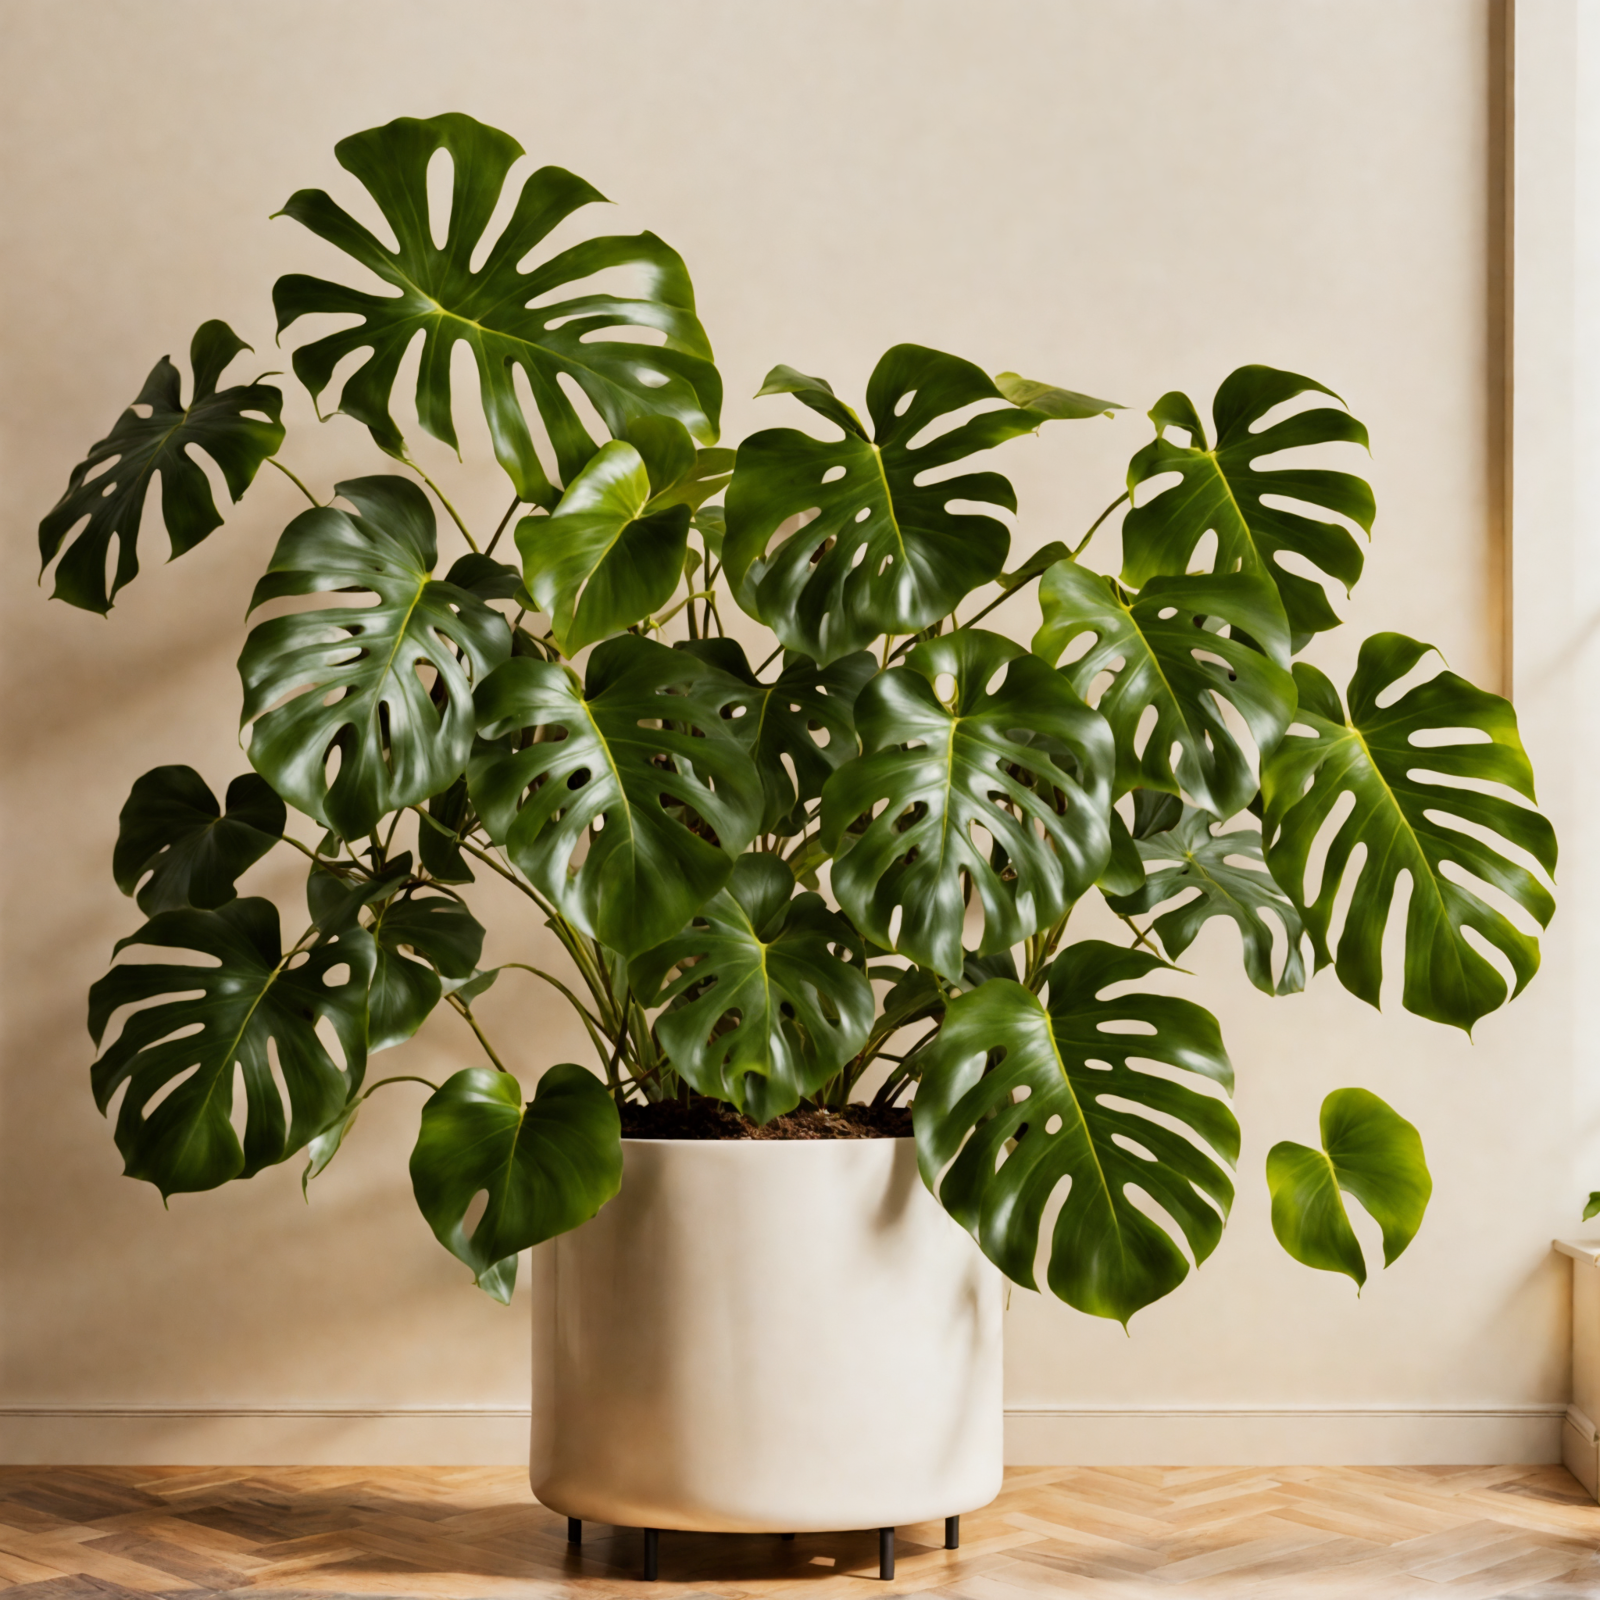 Monstera deliciosa in a white vase on a wood floor, with clear, neutral lighting.